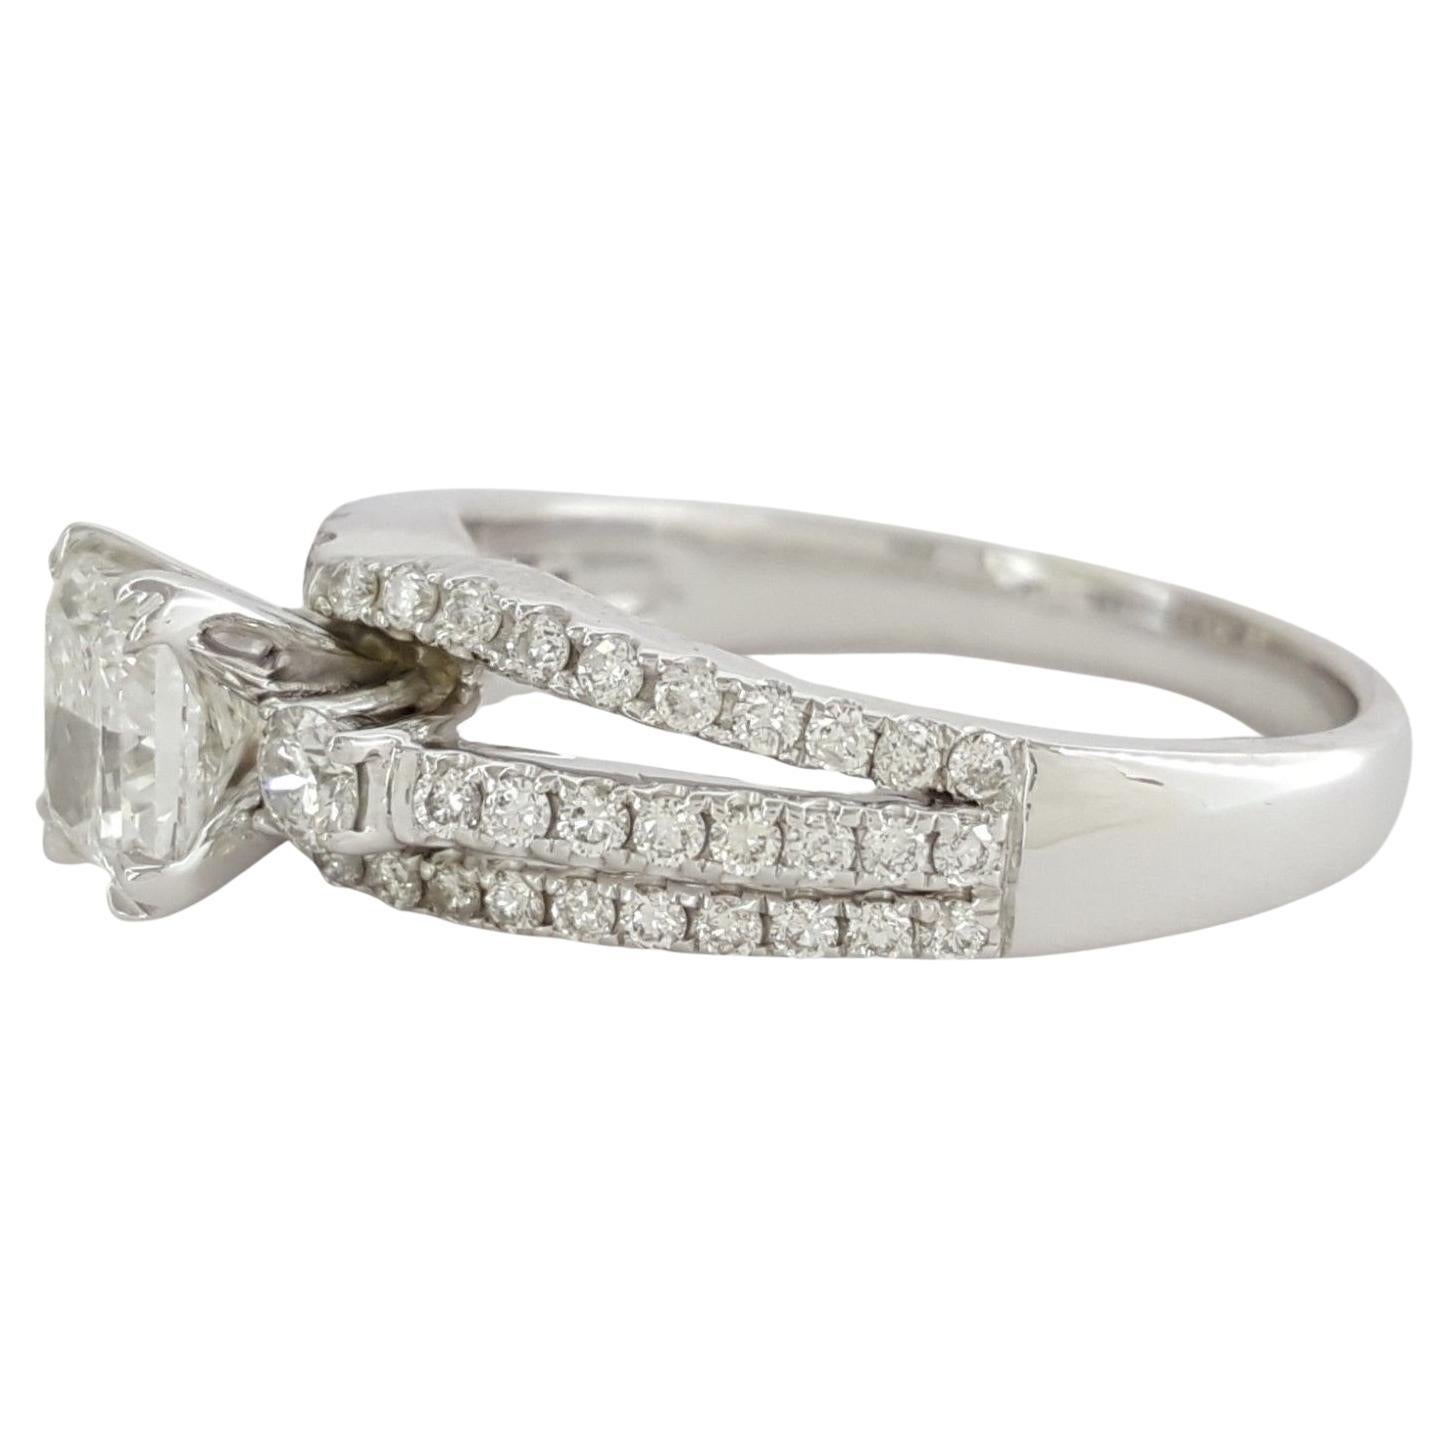 White Gold Radiant Cut Diamond Engagement Ring. 



The ring weighs 4.6 grams, size 7.25, the center stone is a Radiant Cut diamond weighing 0.90 ct, F in color, SI1 in clarity. 